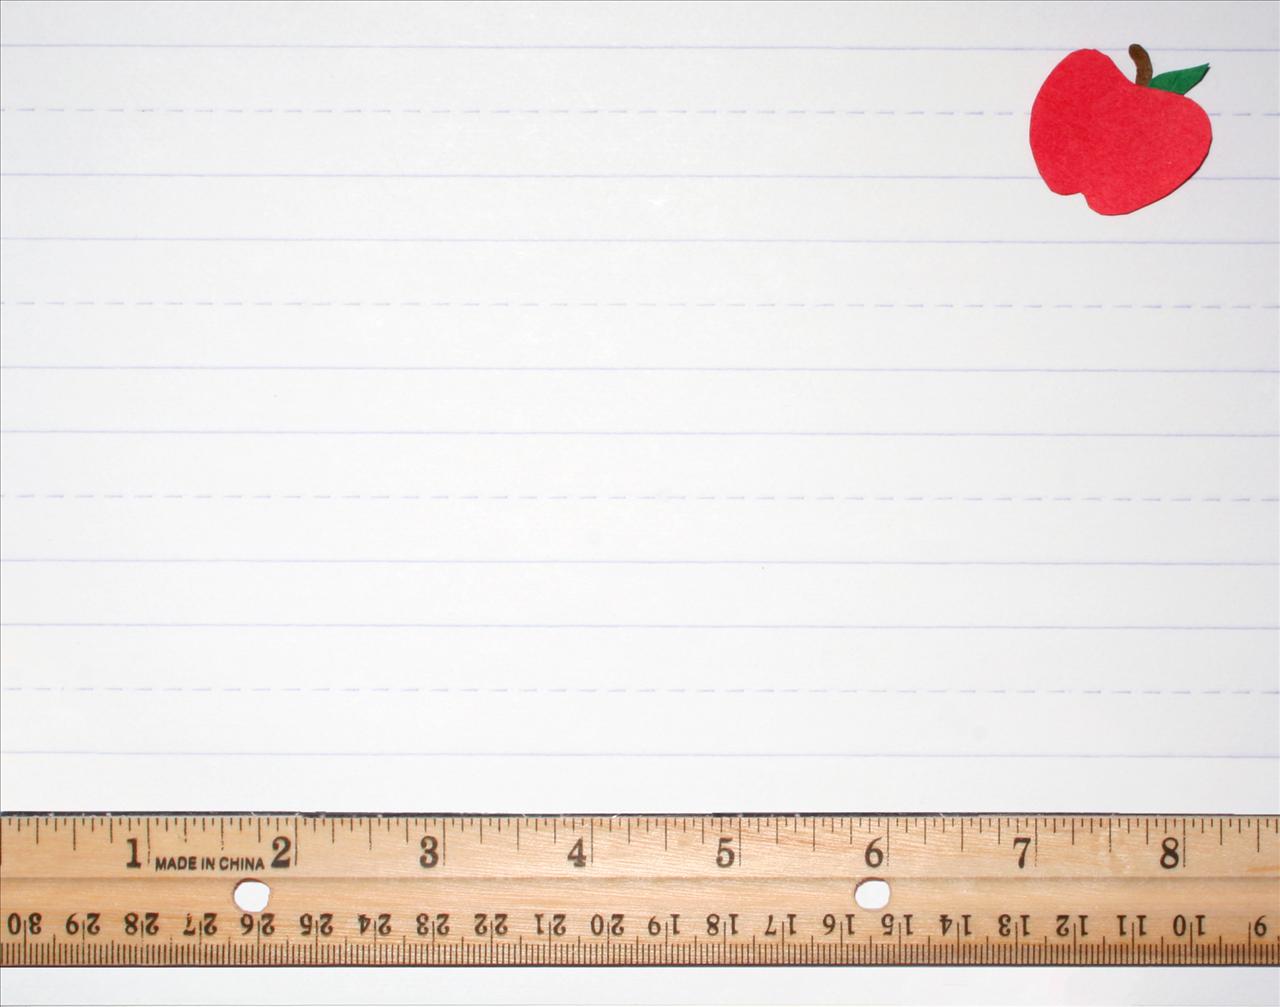 Apple And Rulers On Paper Background Wallpaper For Powerpoint